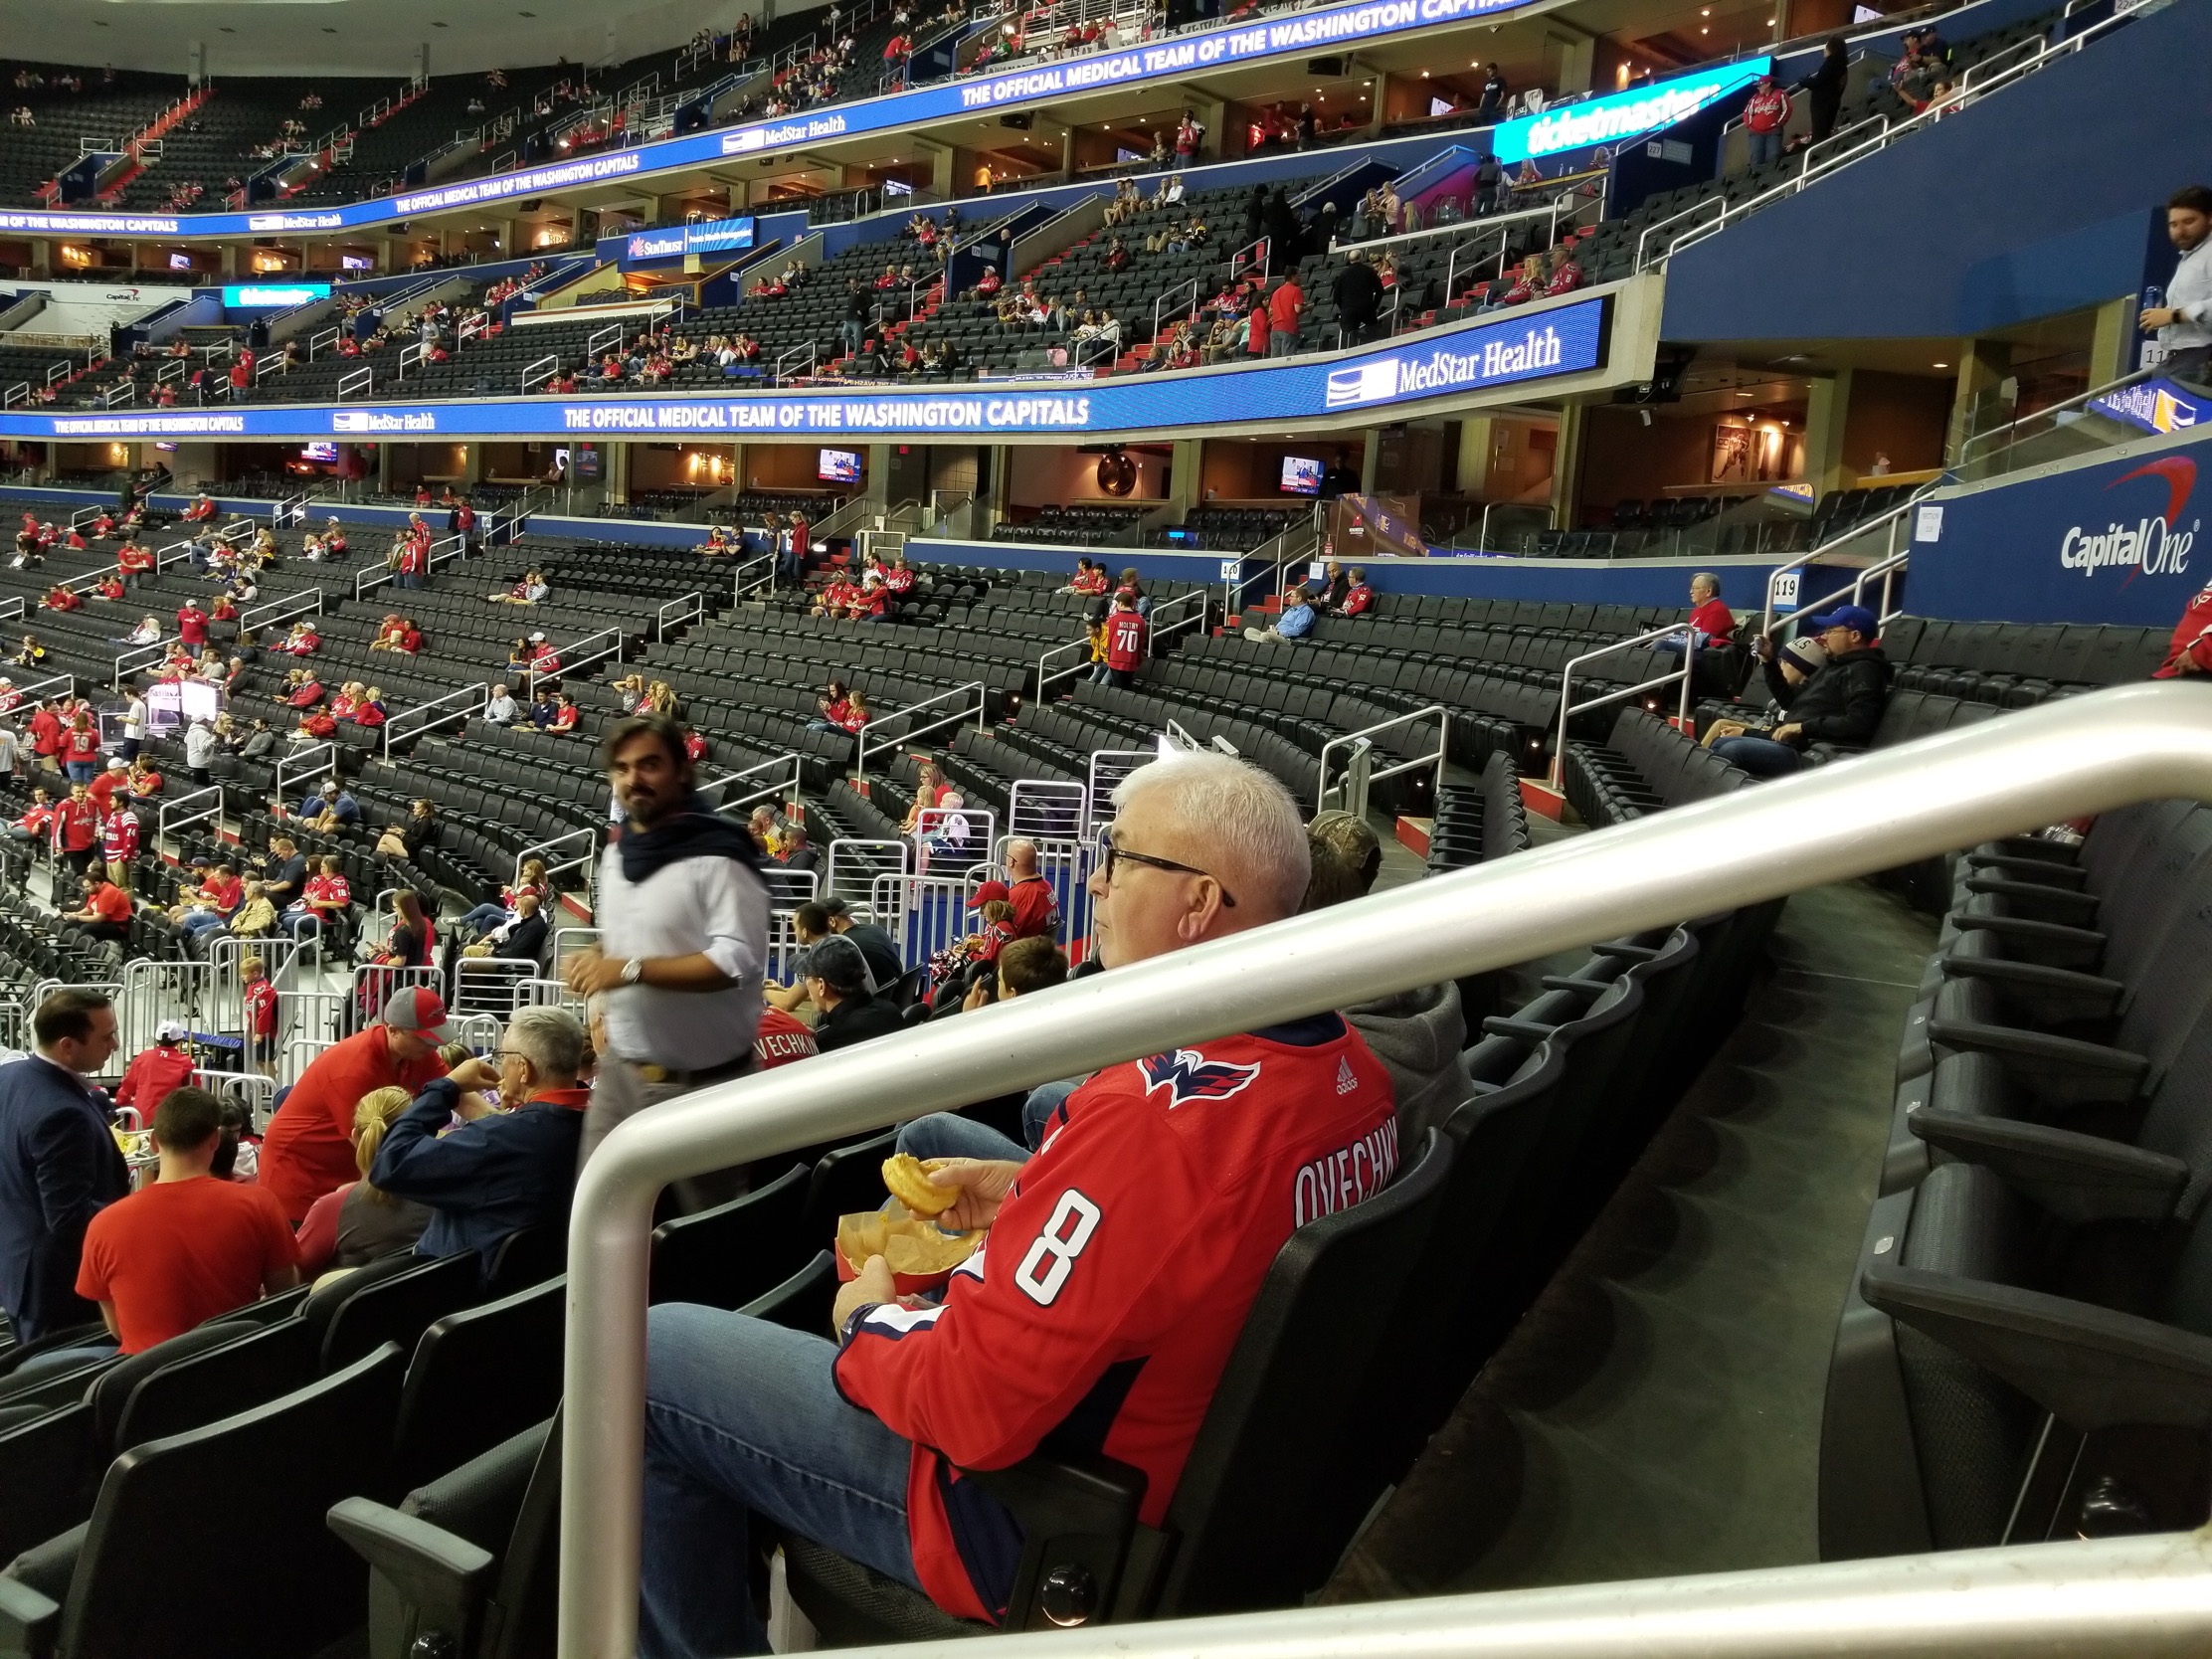 Section 117 at Capital One Arena 